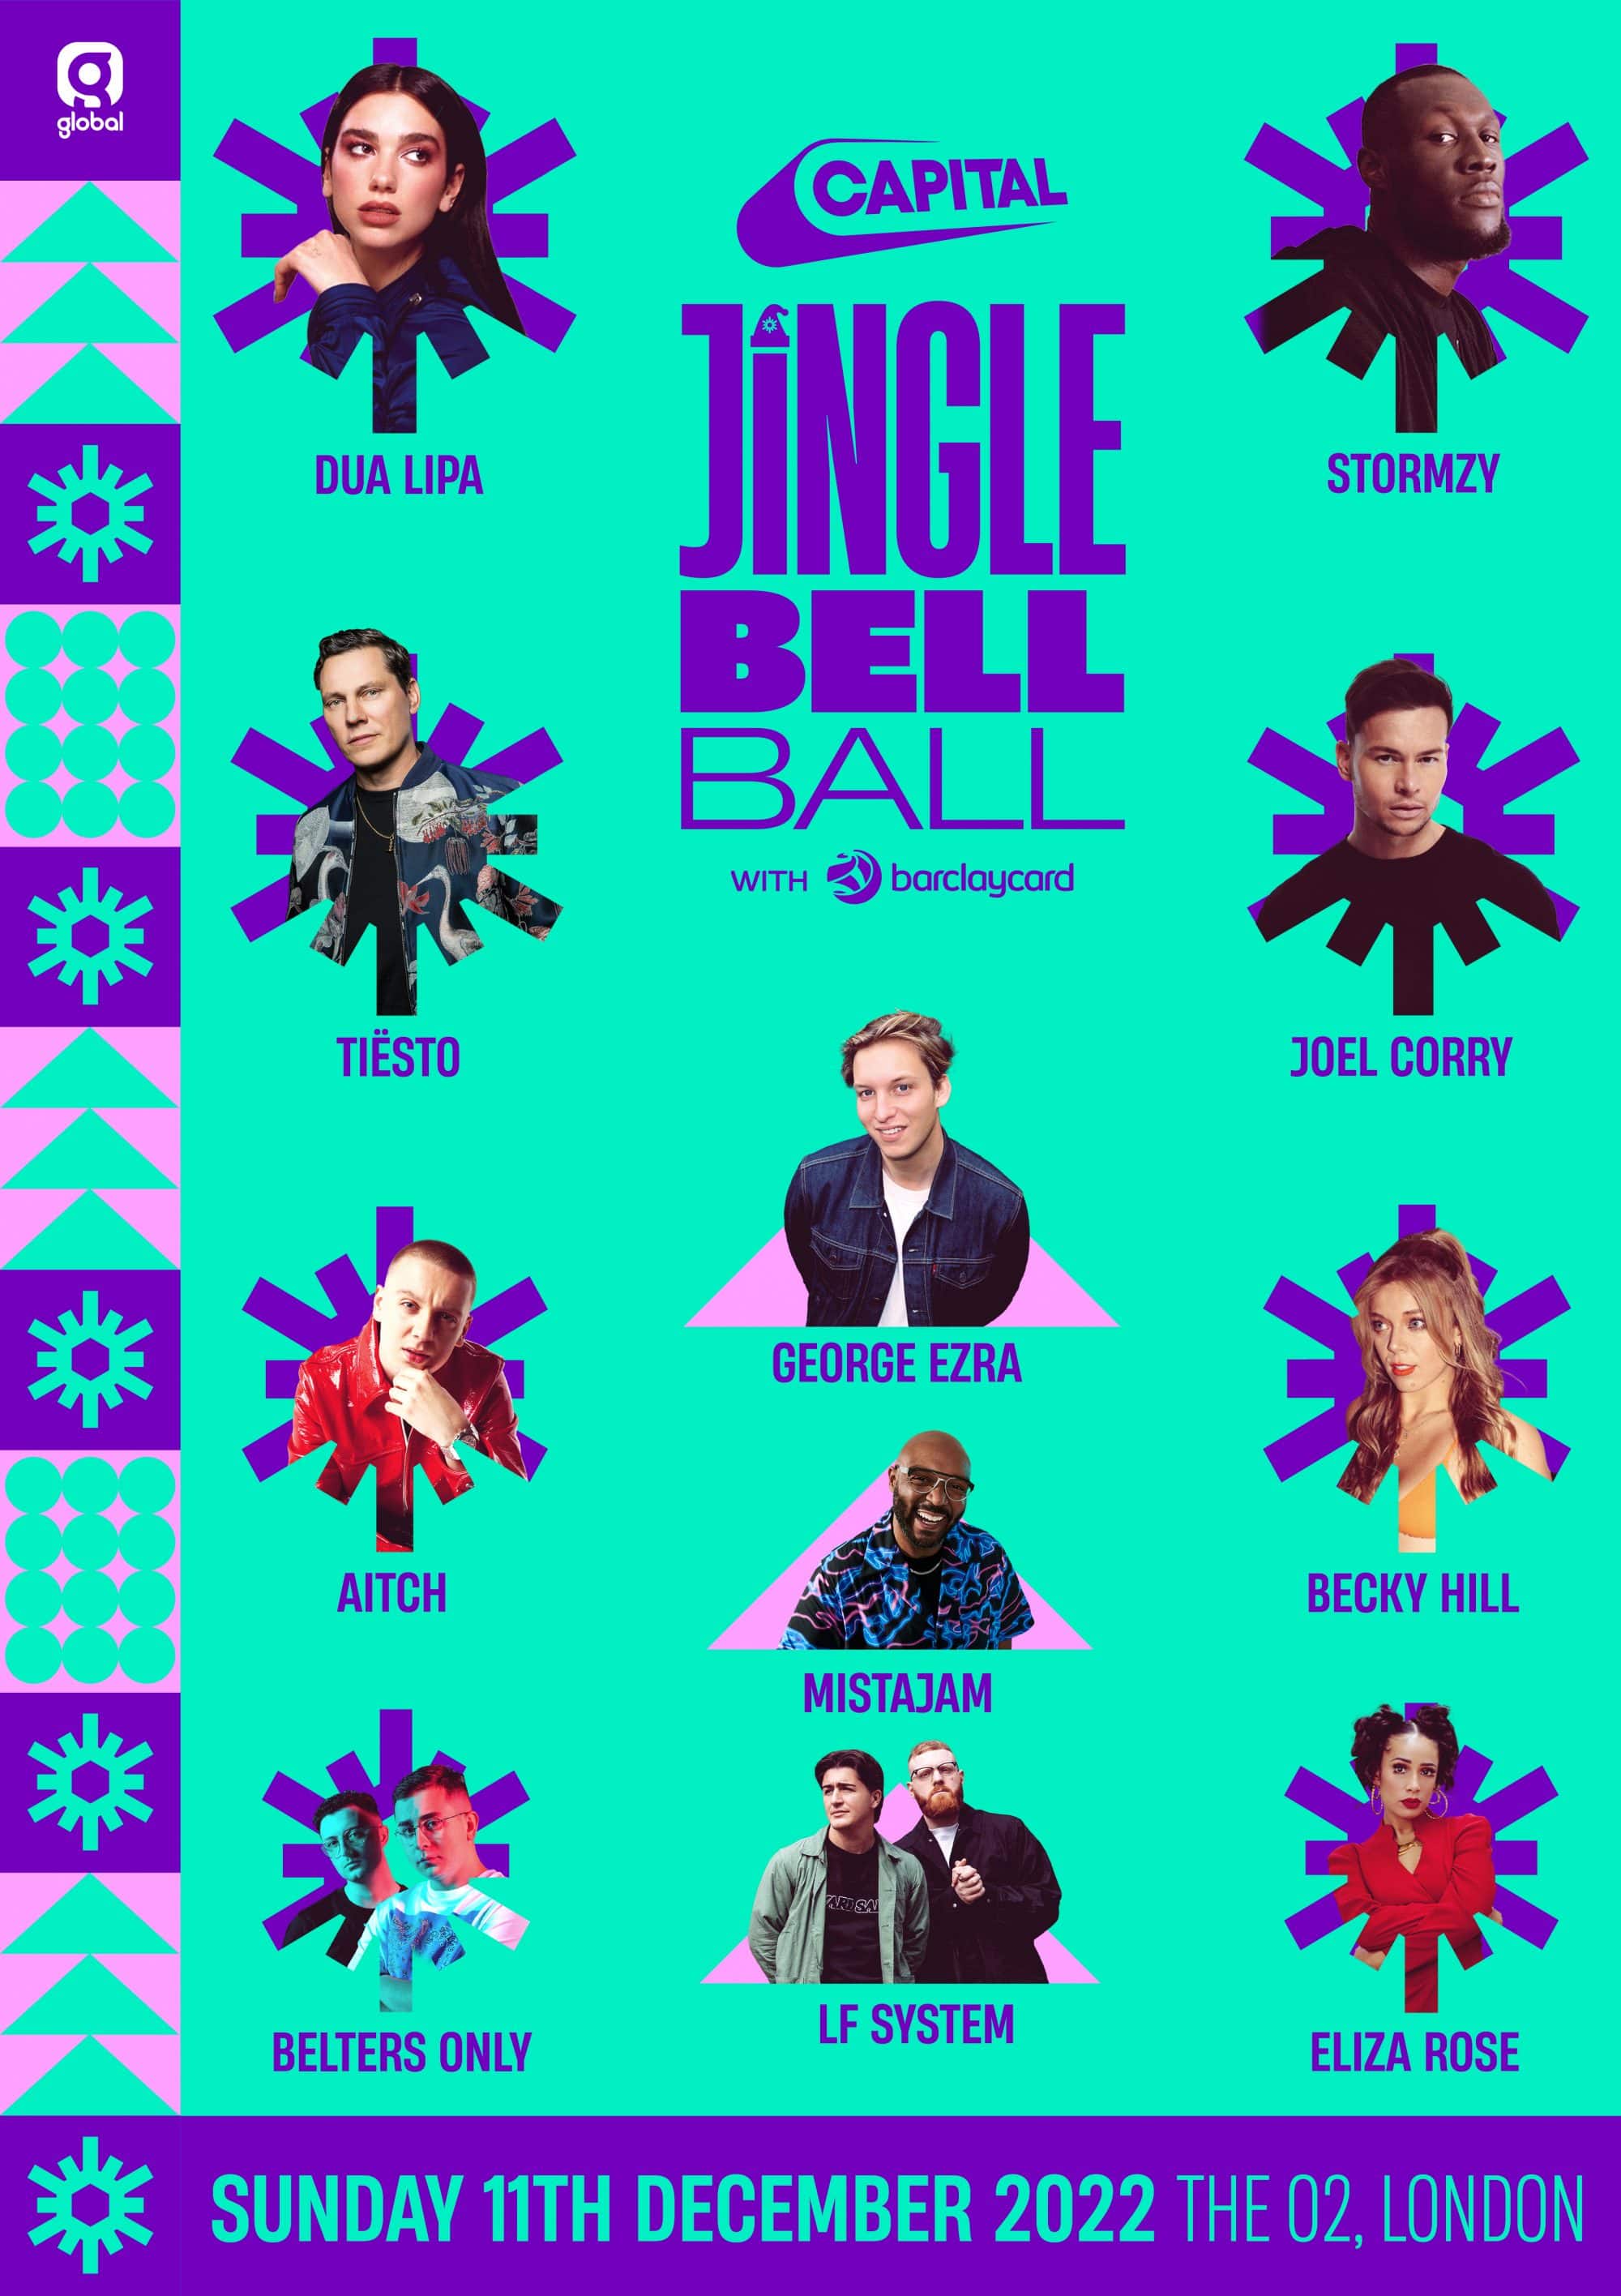 Capital’s Jingle Bell Ball with Barclaycard is back! Night two lineup